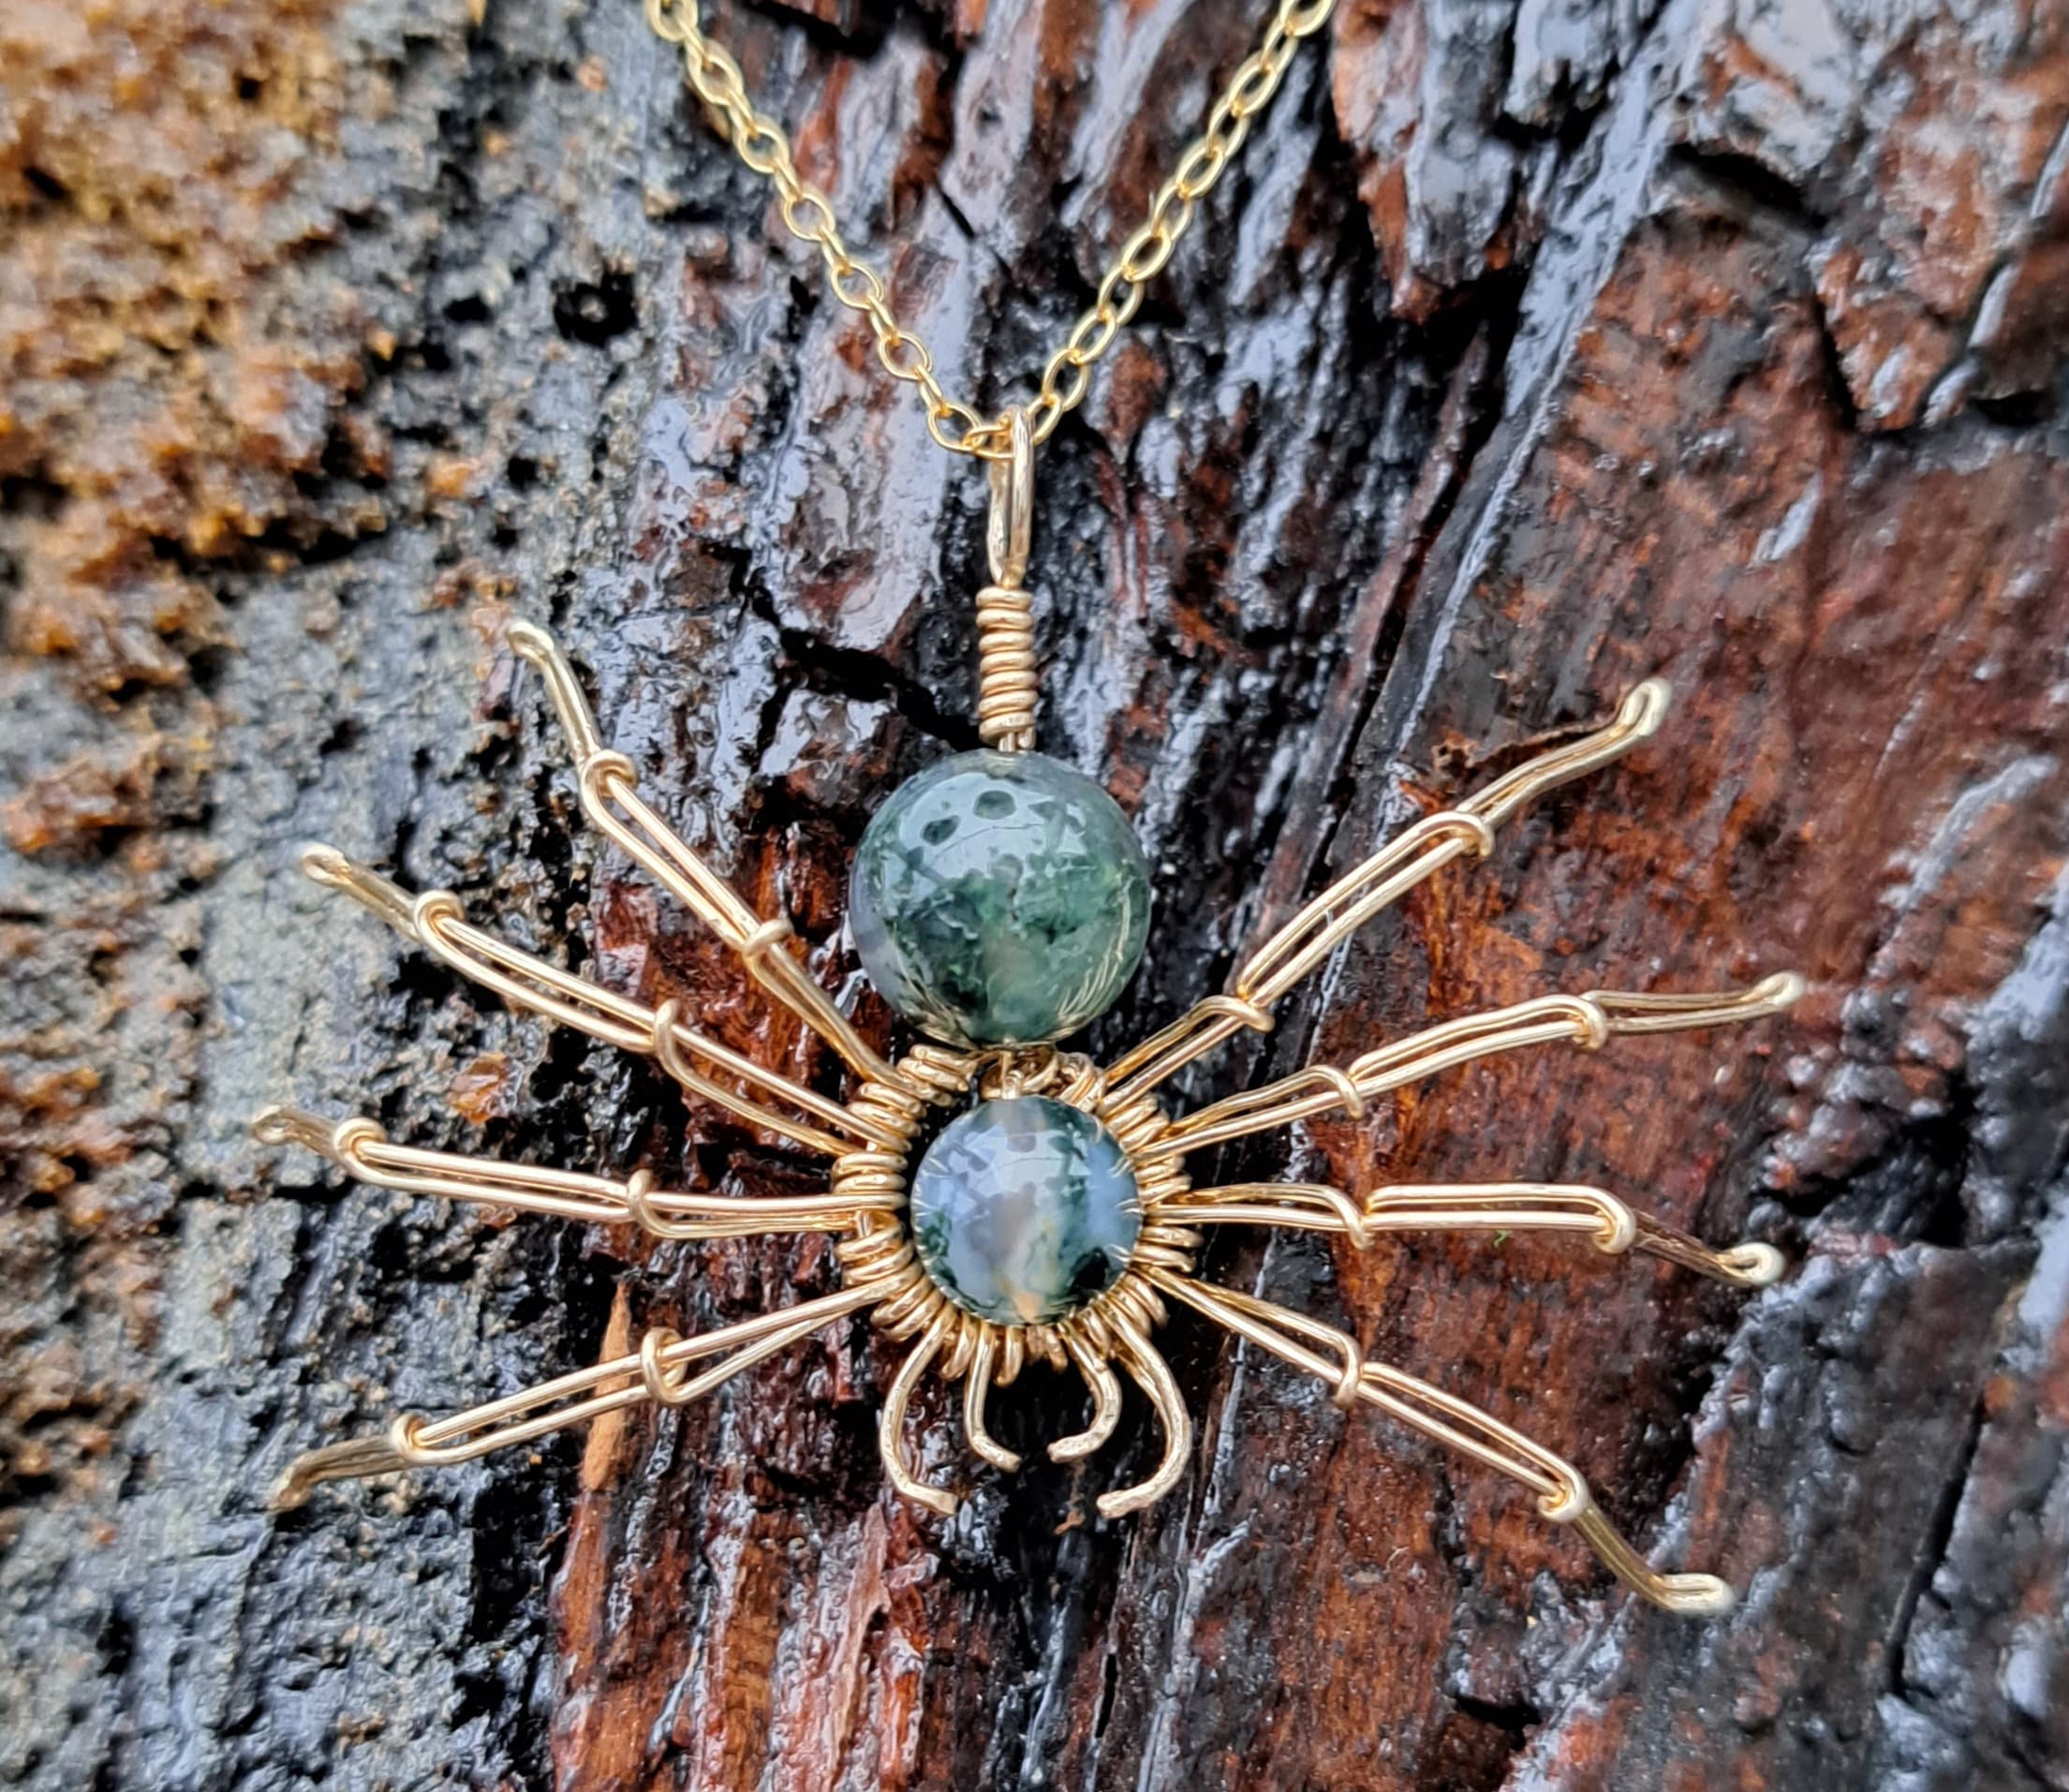 Gold Spider Necklace in 30 Stone Types Wirewrapped Jewelry